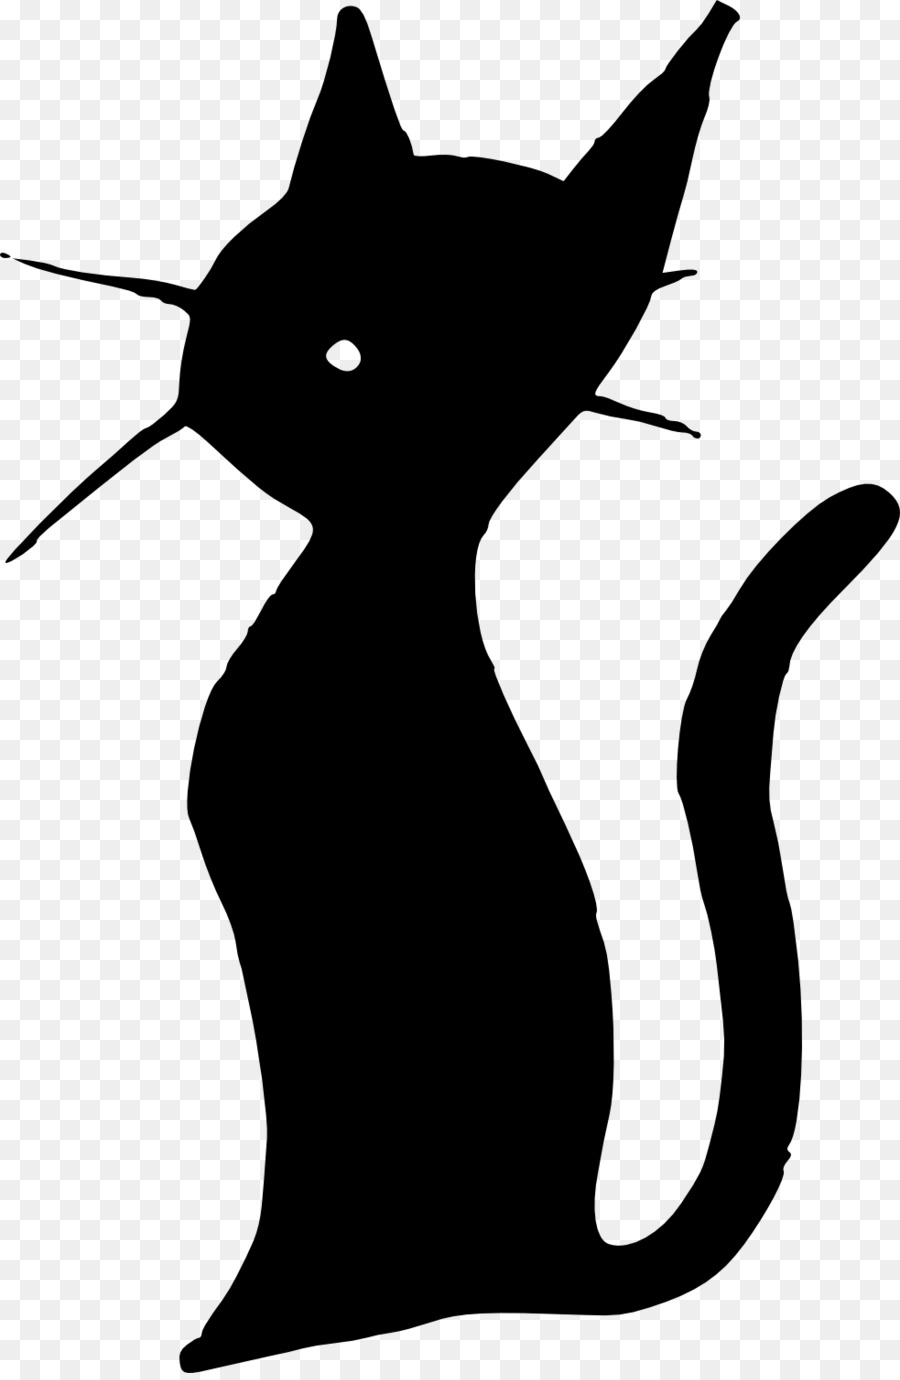 Cat Kitten Silhouette Paintbrush Clip art - whisk png download - 983*1500 - Free Transparent Cat png Download.